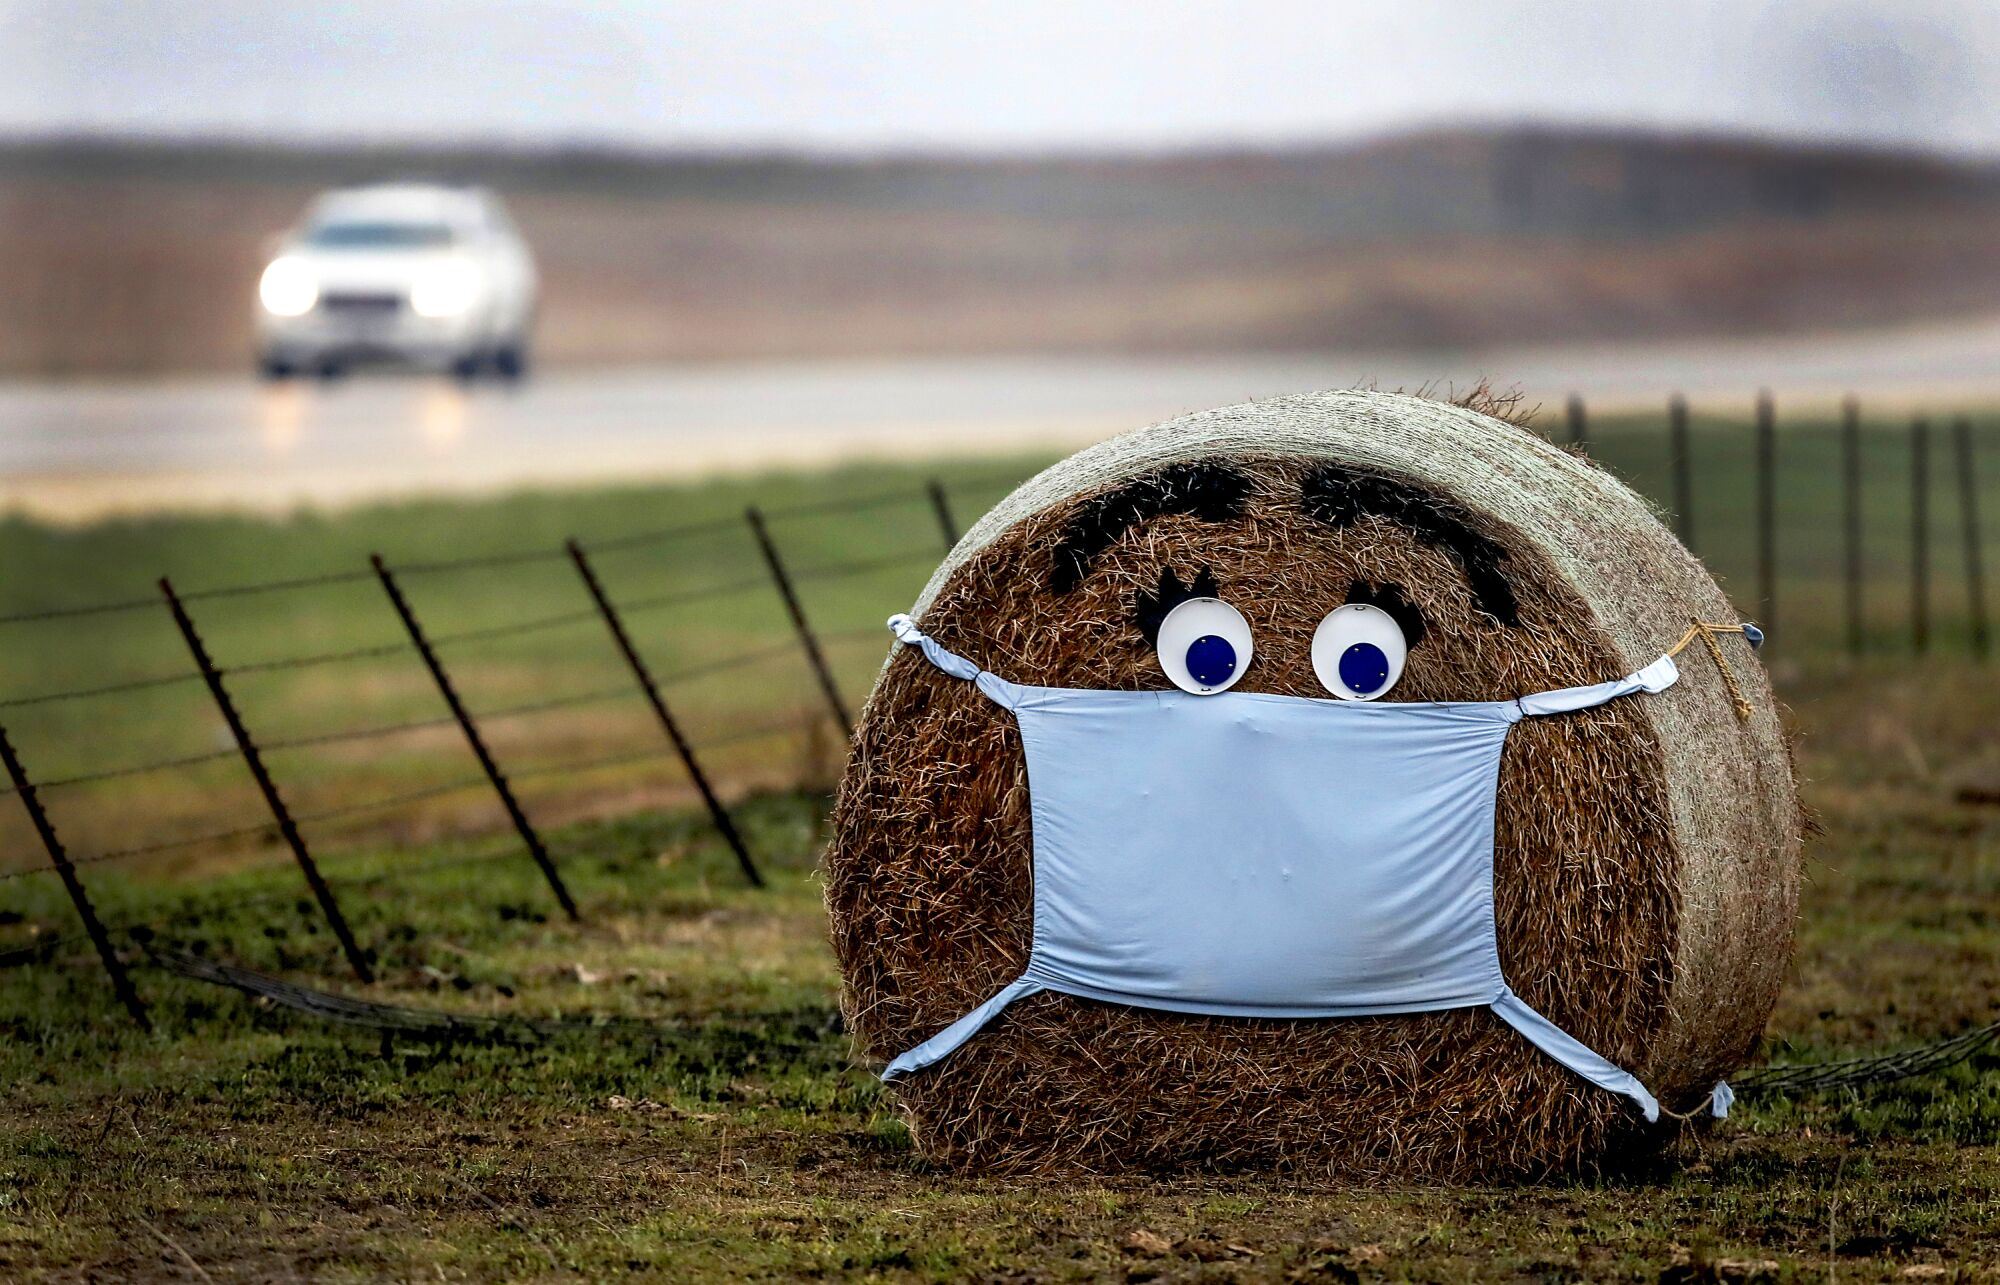 UNITED STATES: A hay bale along the edge of a cattle pasture near Florence, Kansas, is adorned with a surgical mask amid the coronavirus pandemic.